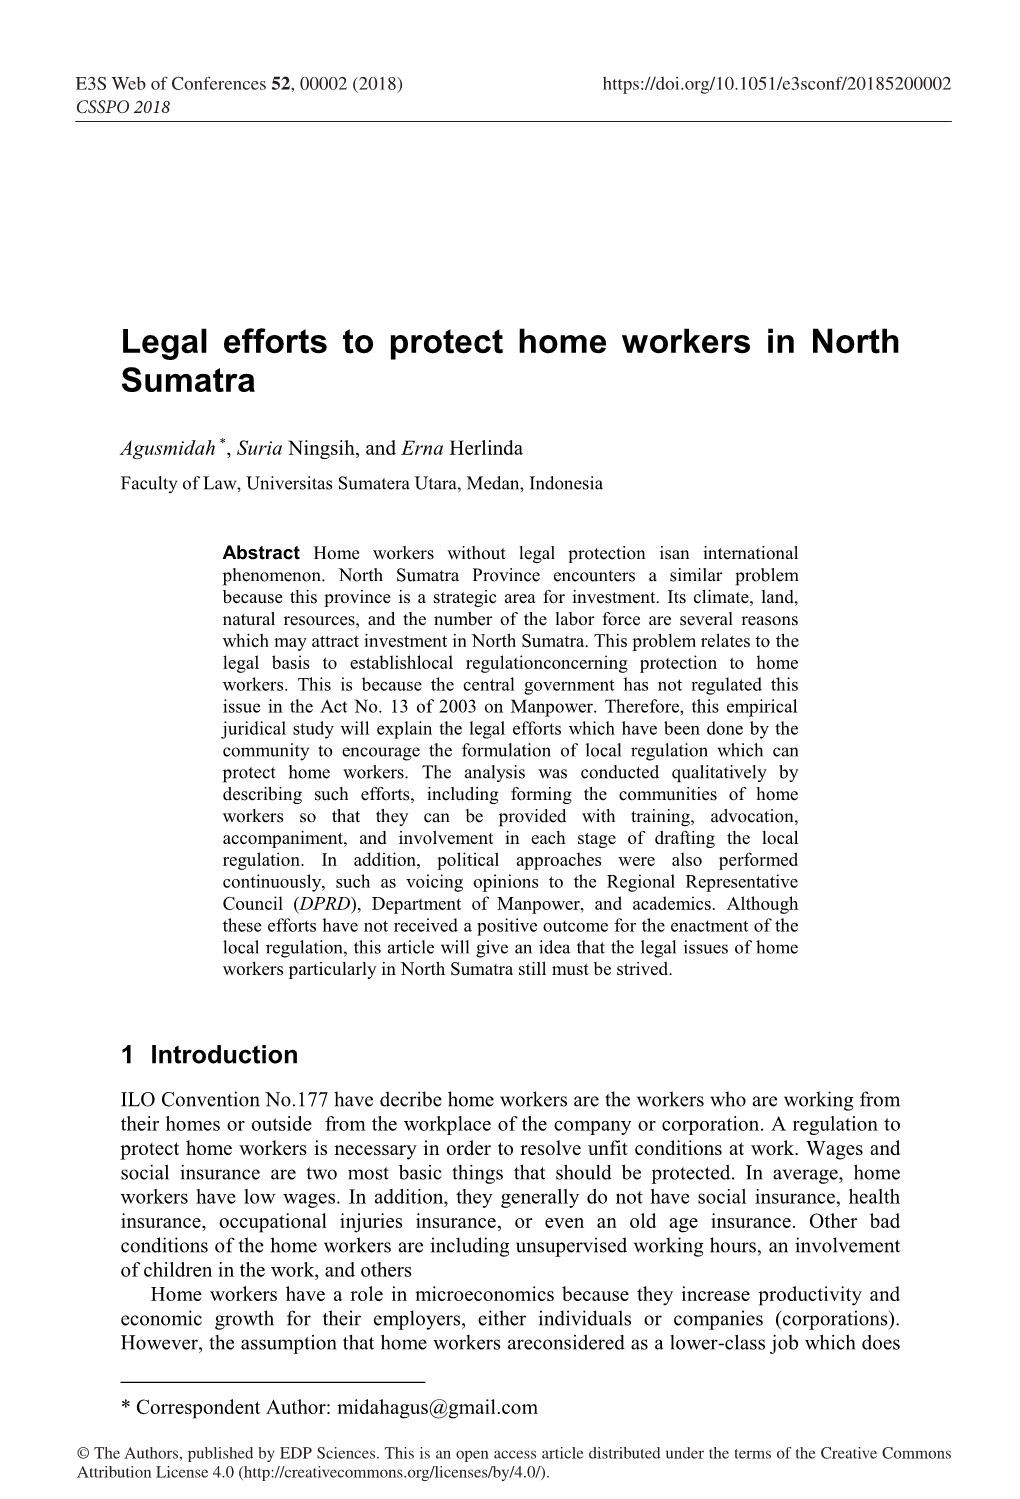 Legal Efforts to Protect Home Workers in North Sumatra